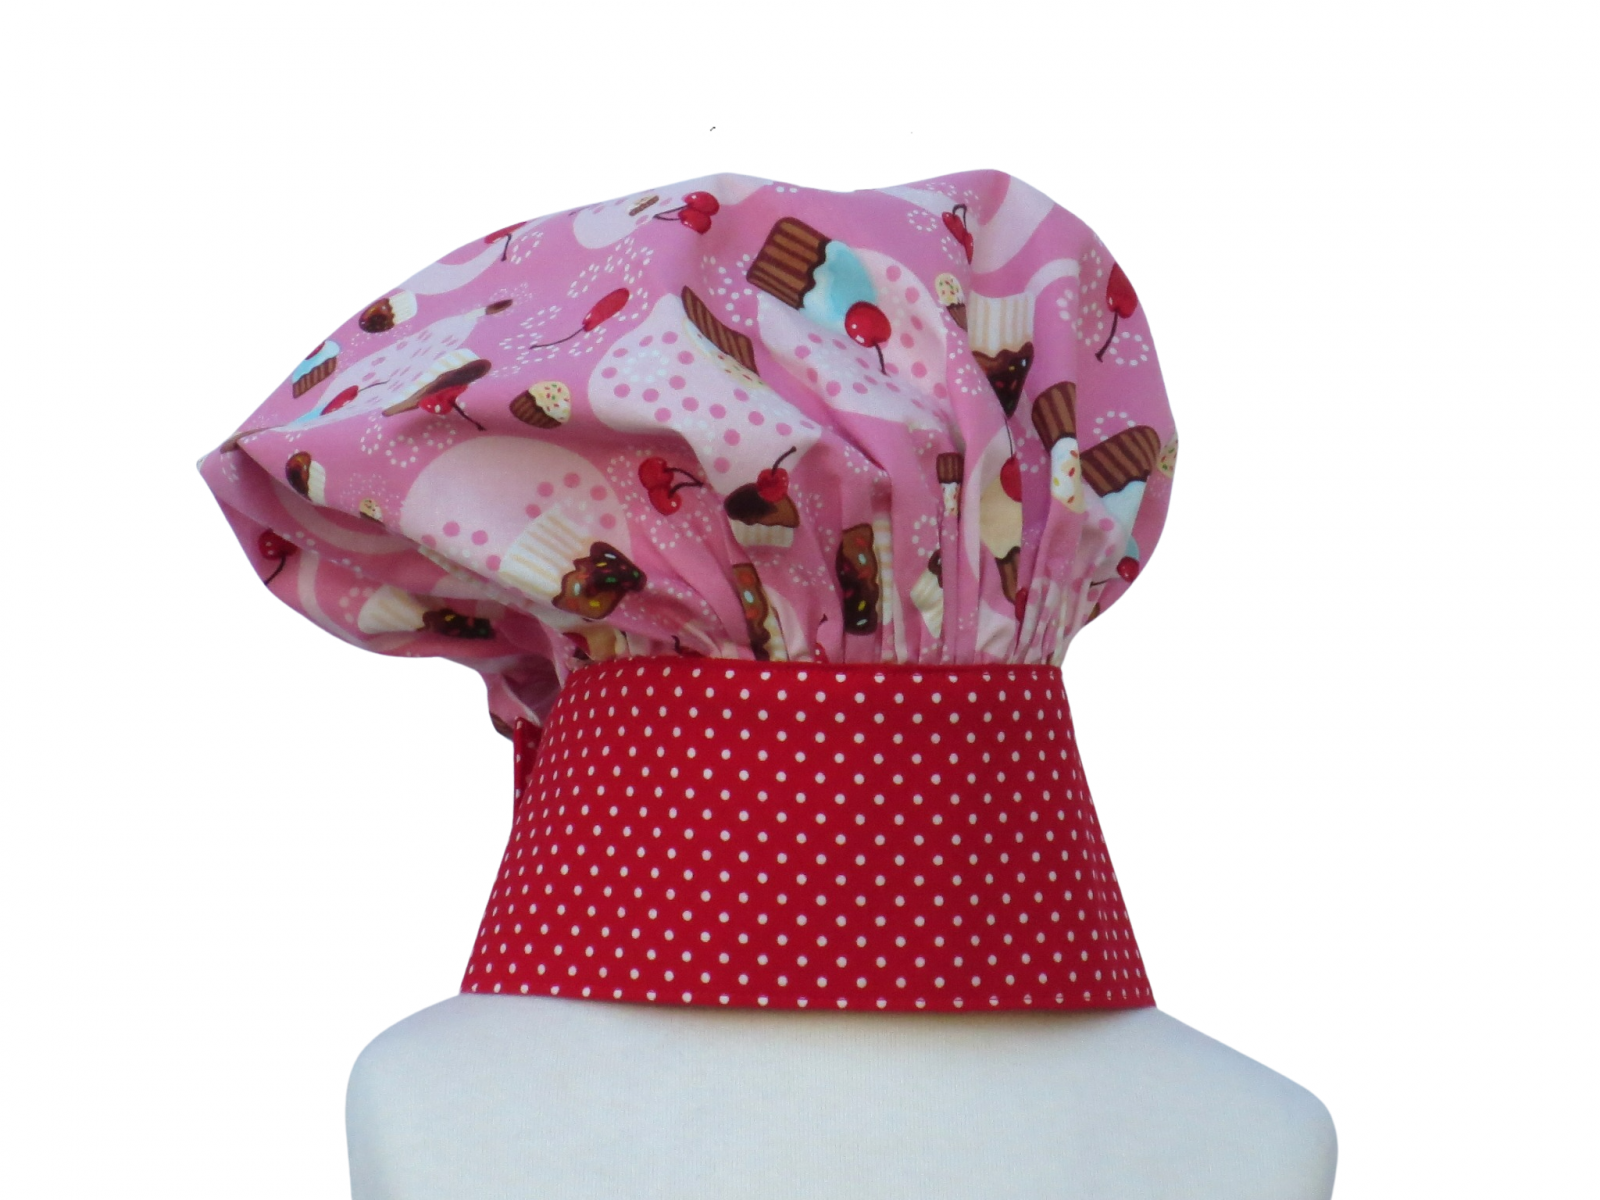 https://www.stitchedbybeverly.com/sites/stitchedbybeverly.indiemade.com/files/imagecache/im_clientsite_product_zoom/girls_pink_red_cupcake_chef_hat.jpg